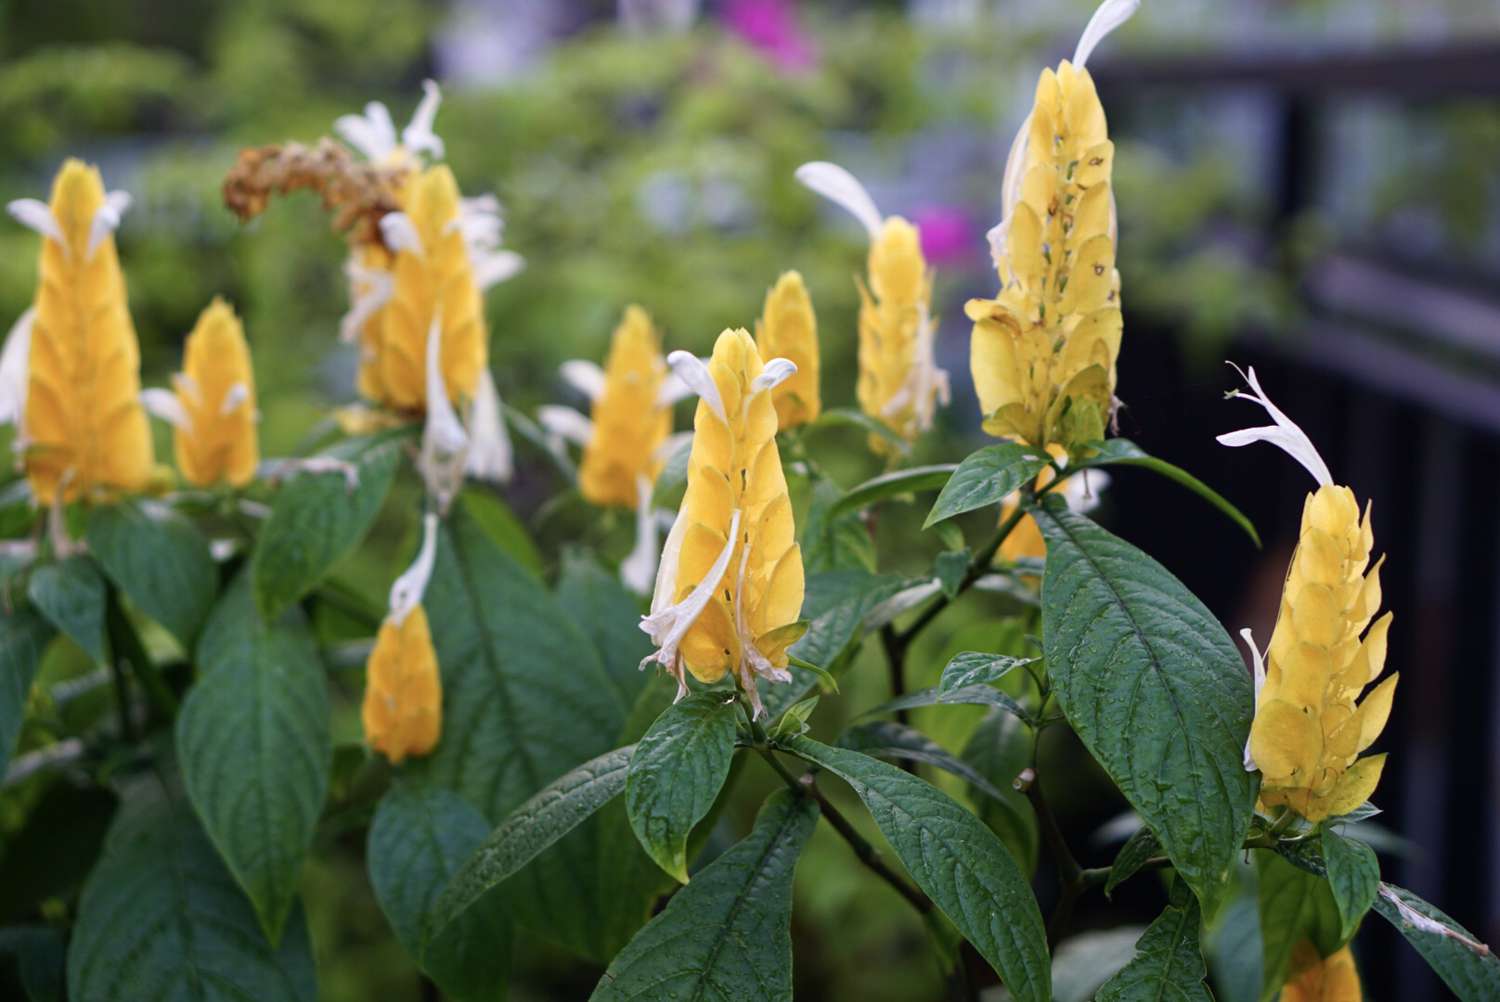 Golden shrimp plants with yellow cone-shaped stamen and small white flowers